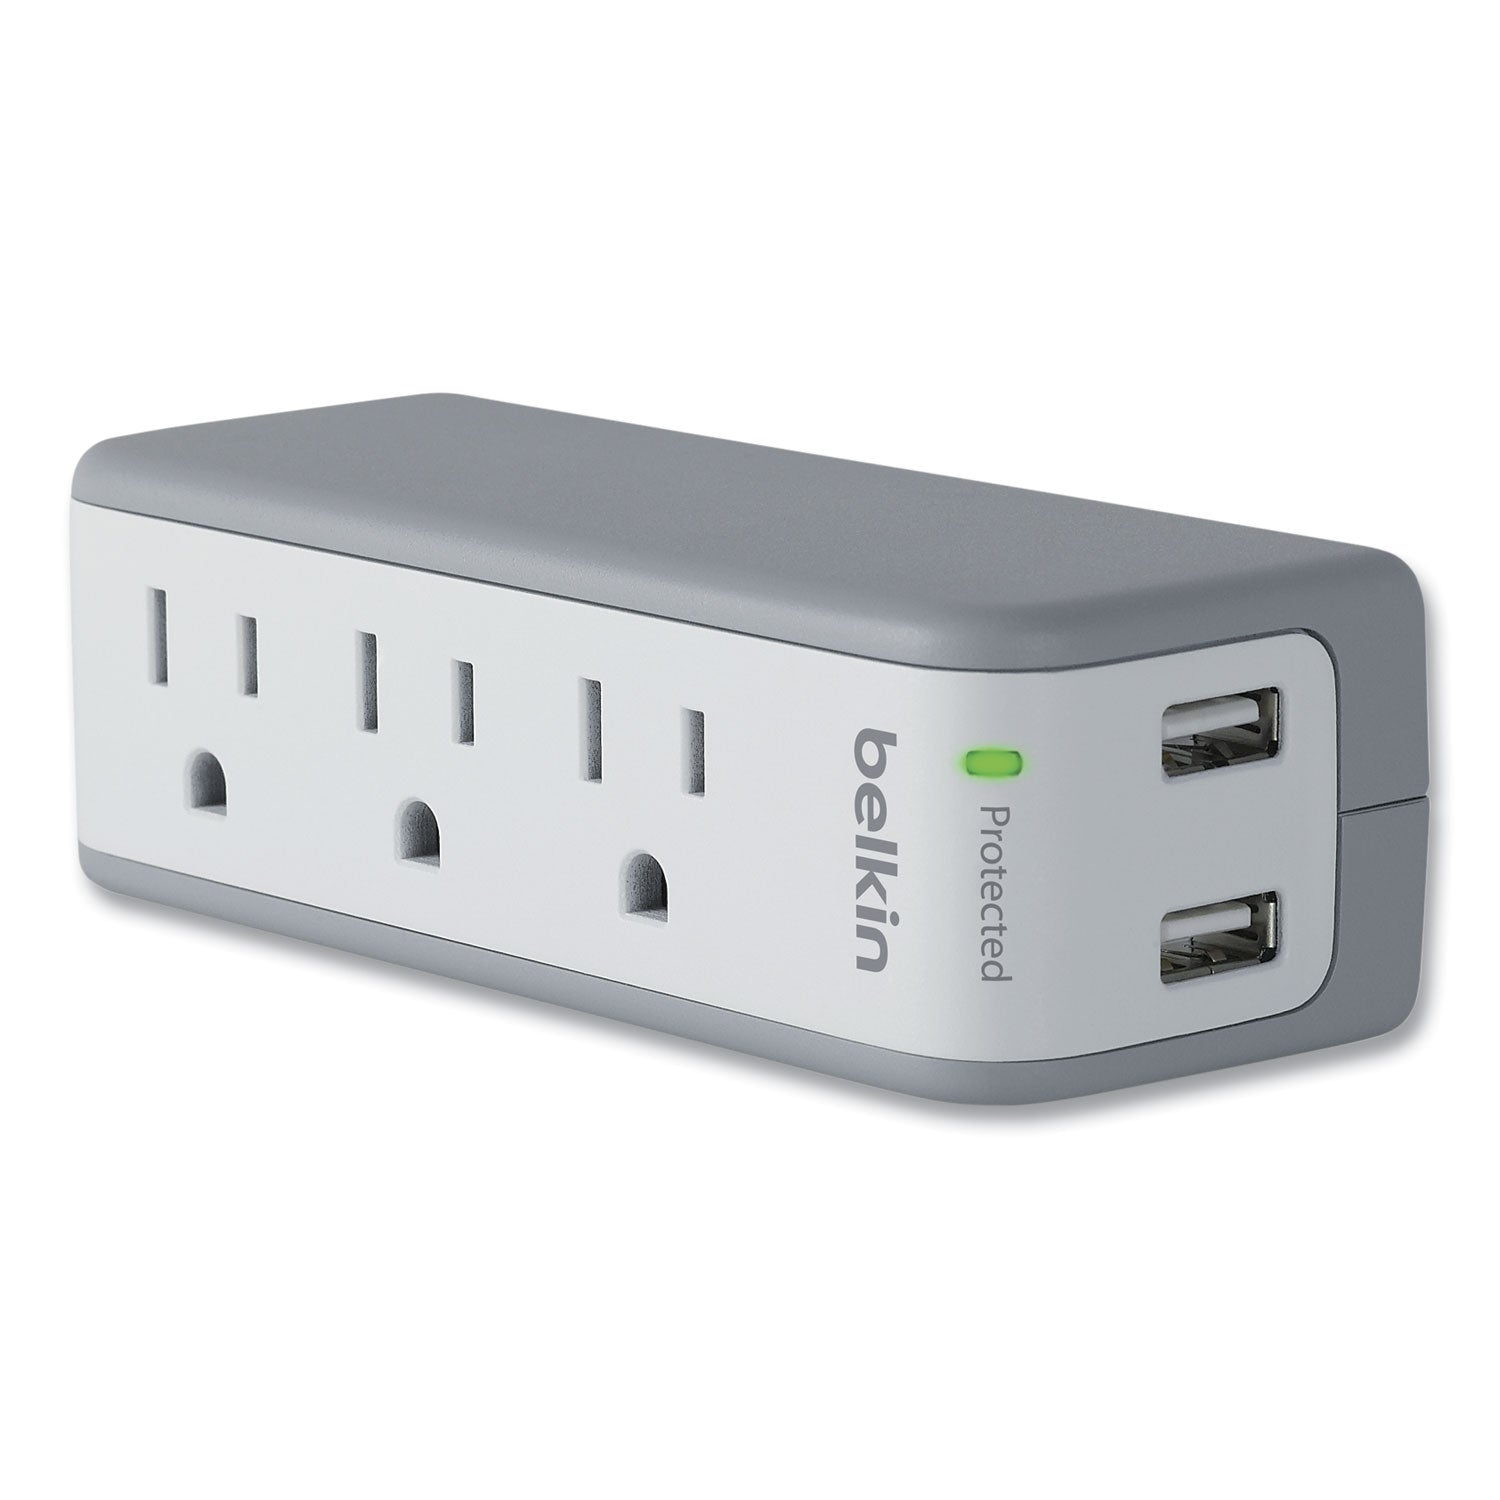 Belkin 3-Outlet Mini Surge Protector with USB Ports (2.1 AMP) - 3 x NEMA 5-15R, 2 x USB - 918 J - 120 V AC Input - 120 V AC, 5 V DC Output - 36 kA - External - 2